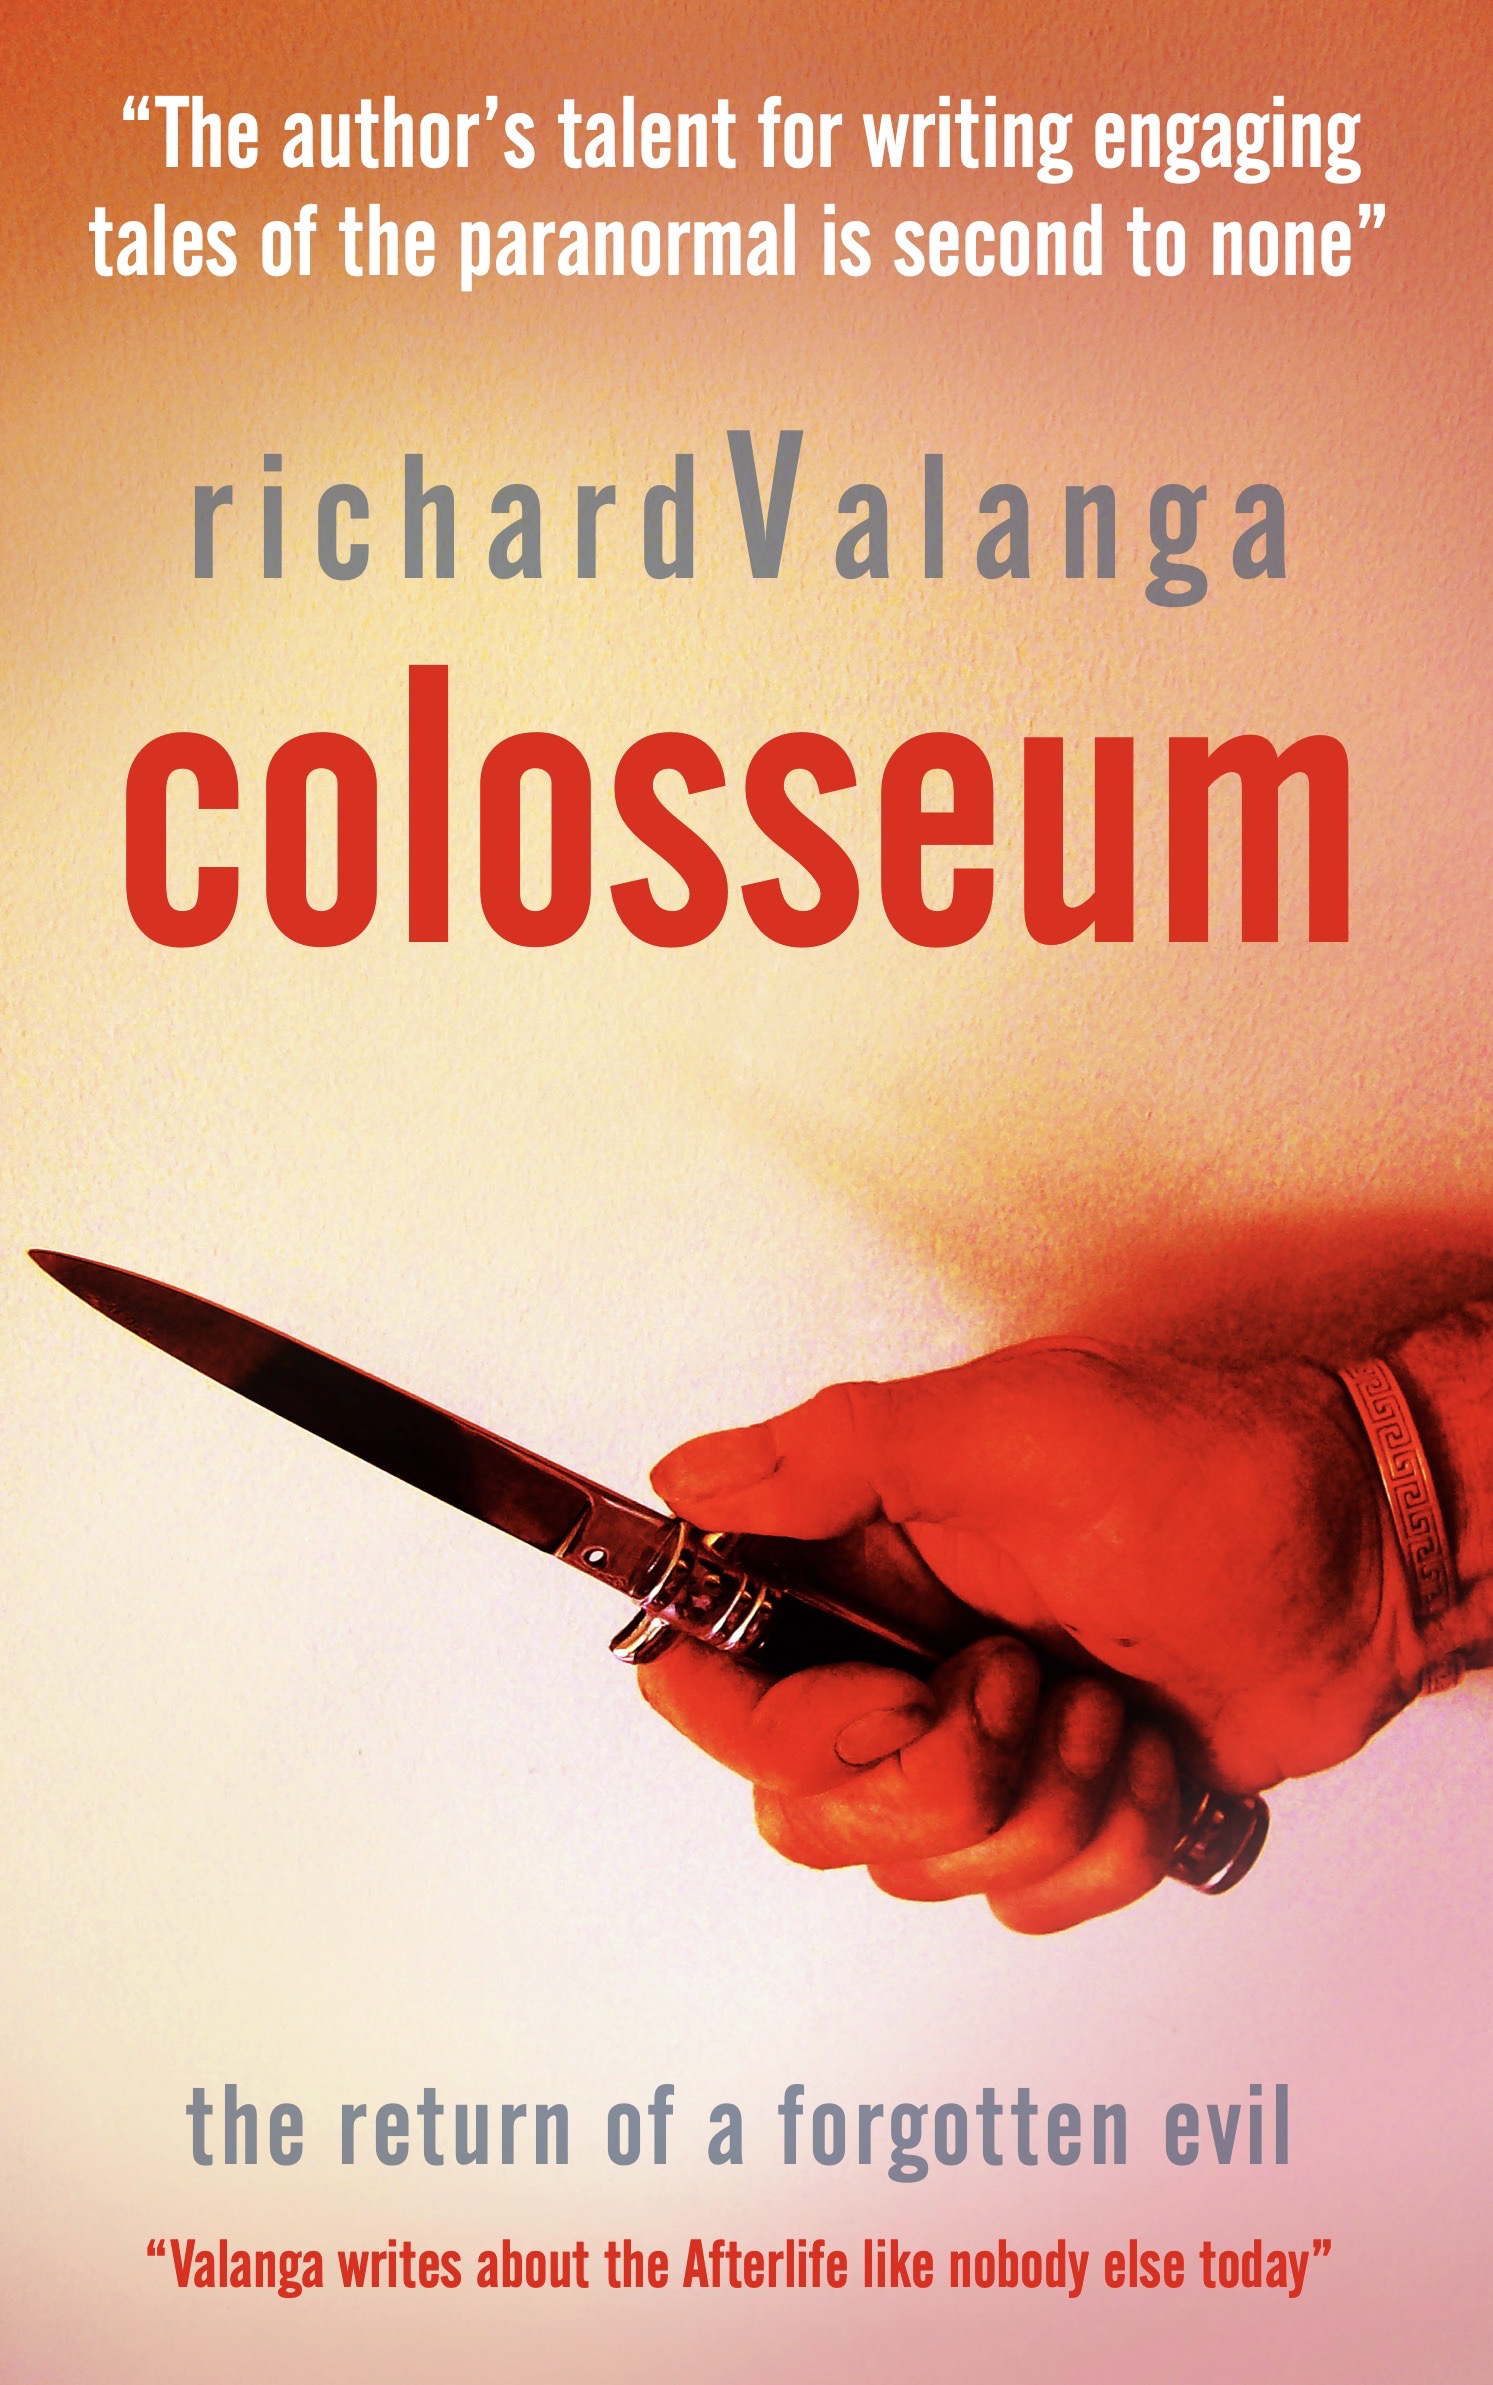 “Colosseum” by Richard Valanga is published